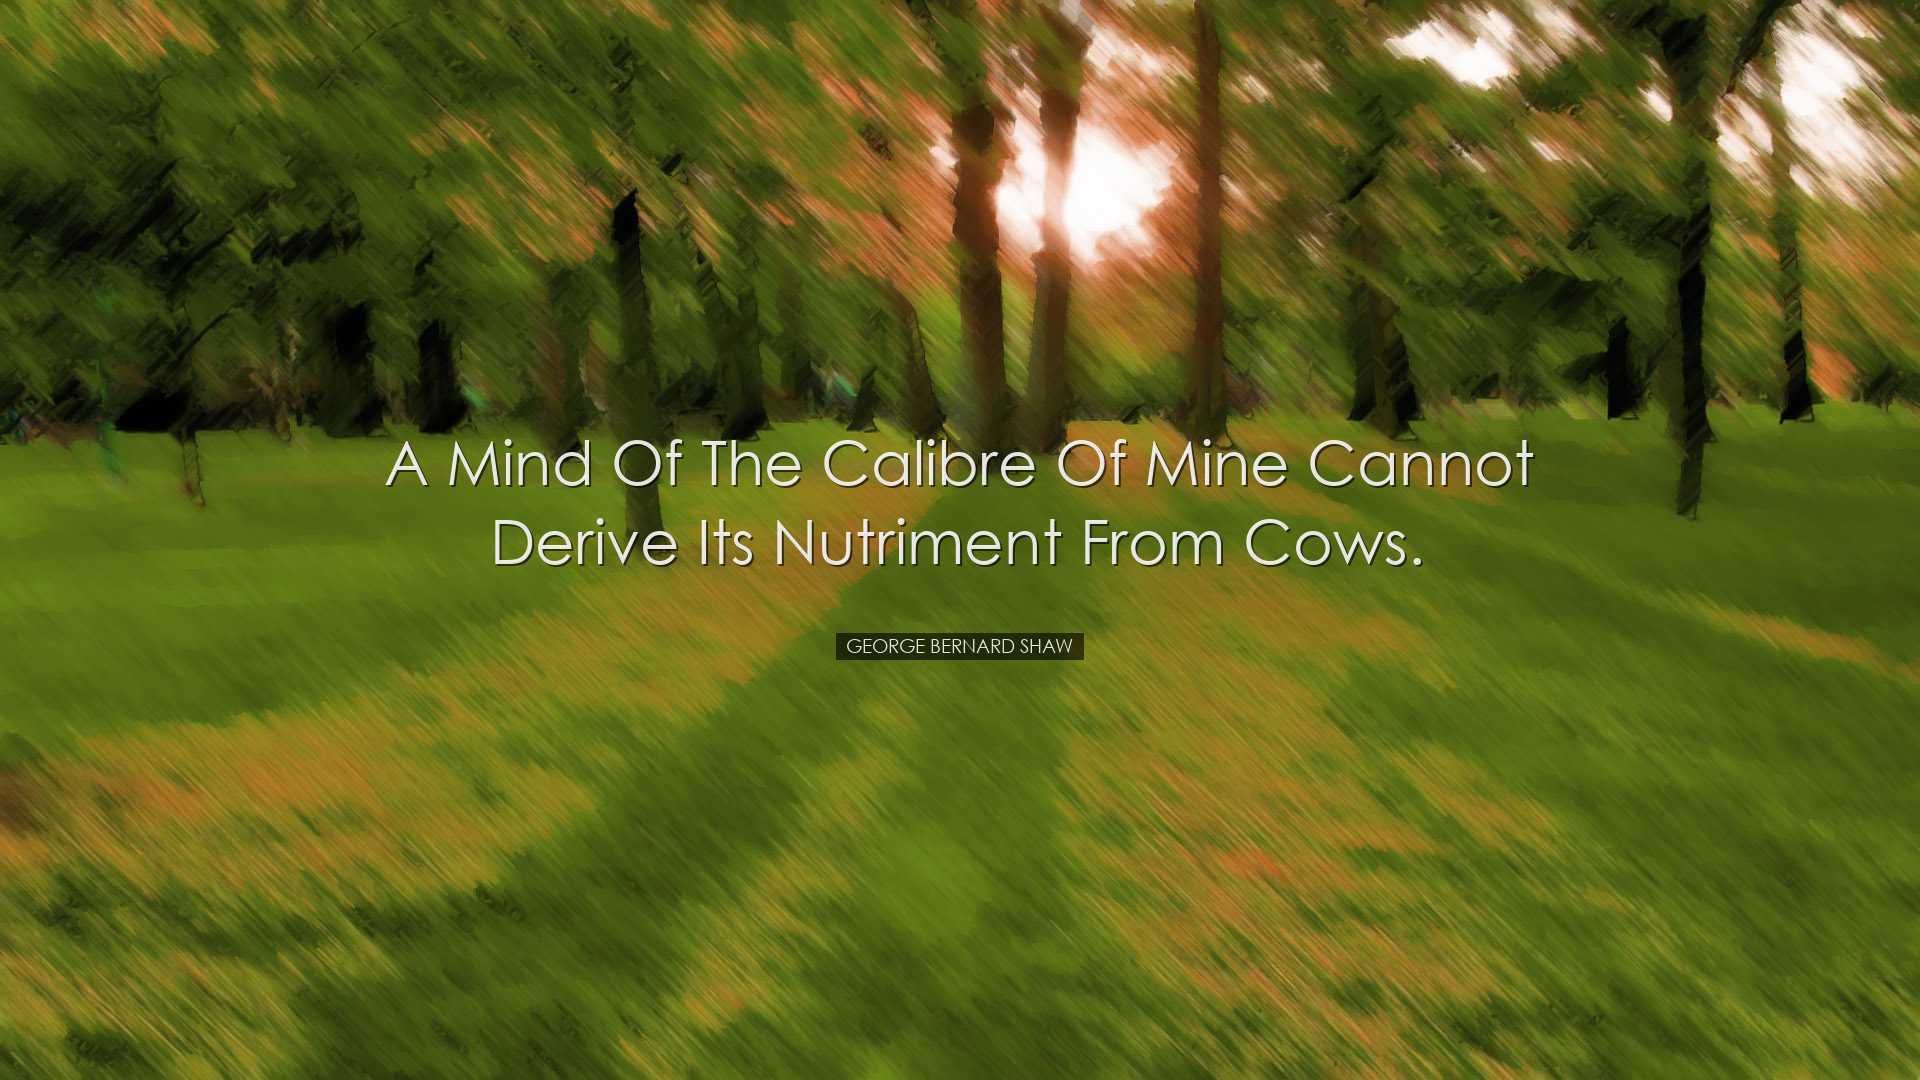 A mind of the calibre of mine cannot derive its nutriment from cow